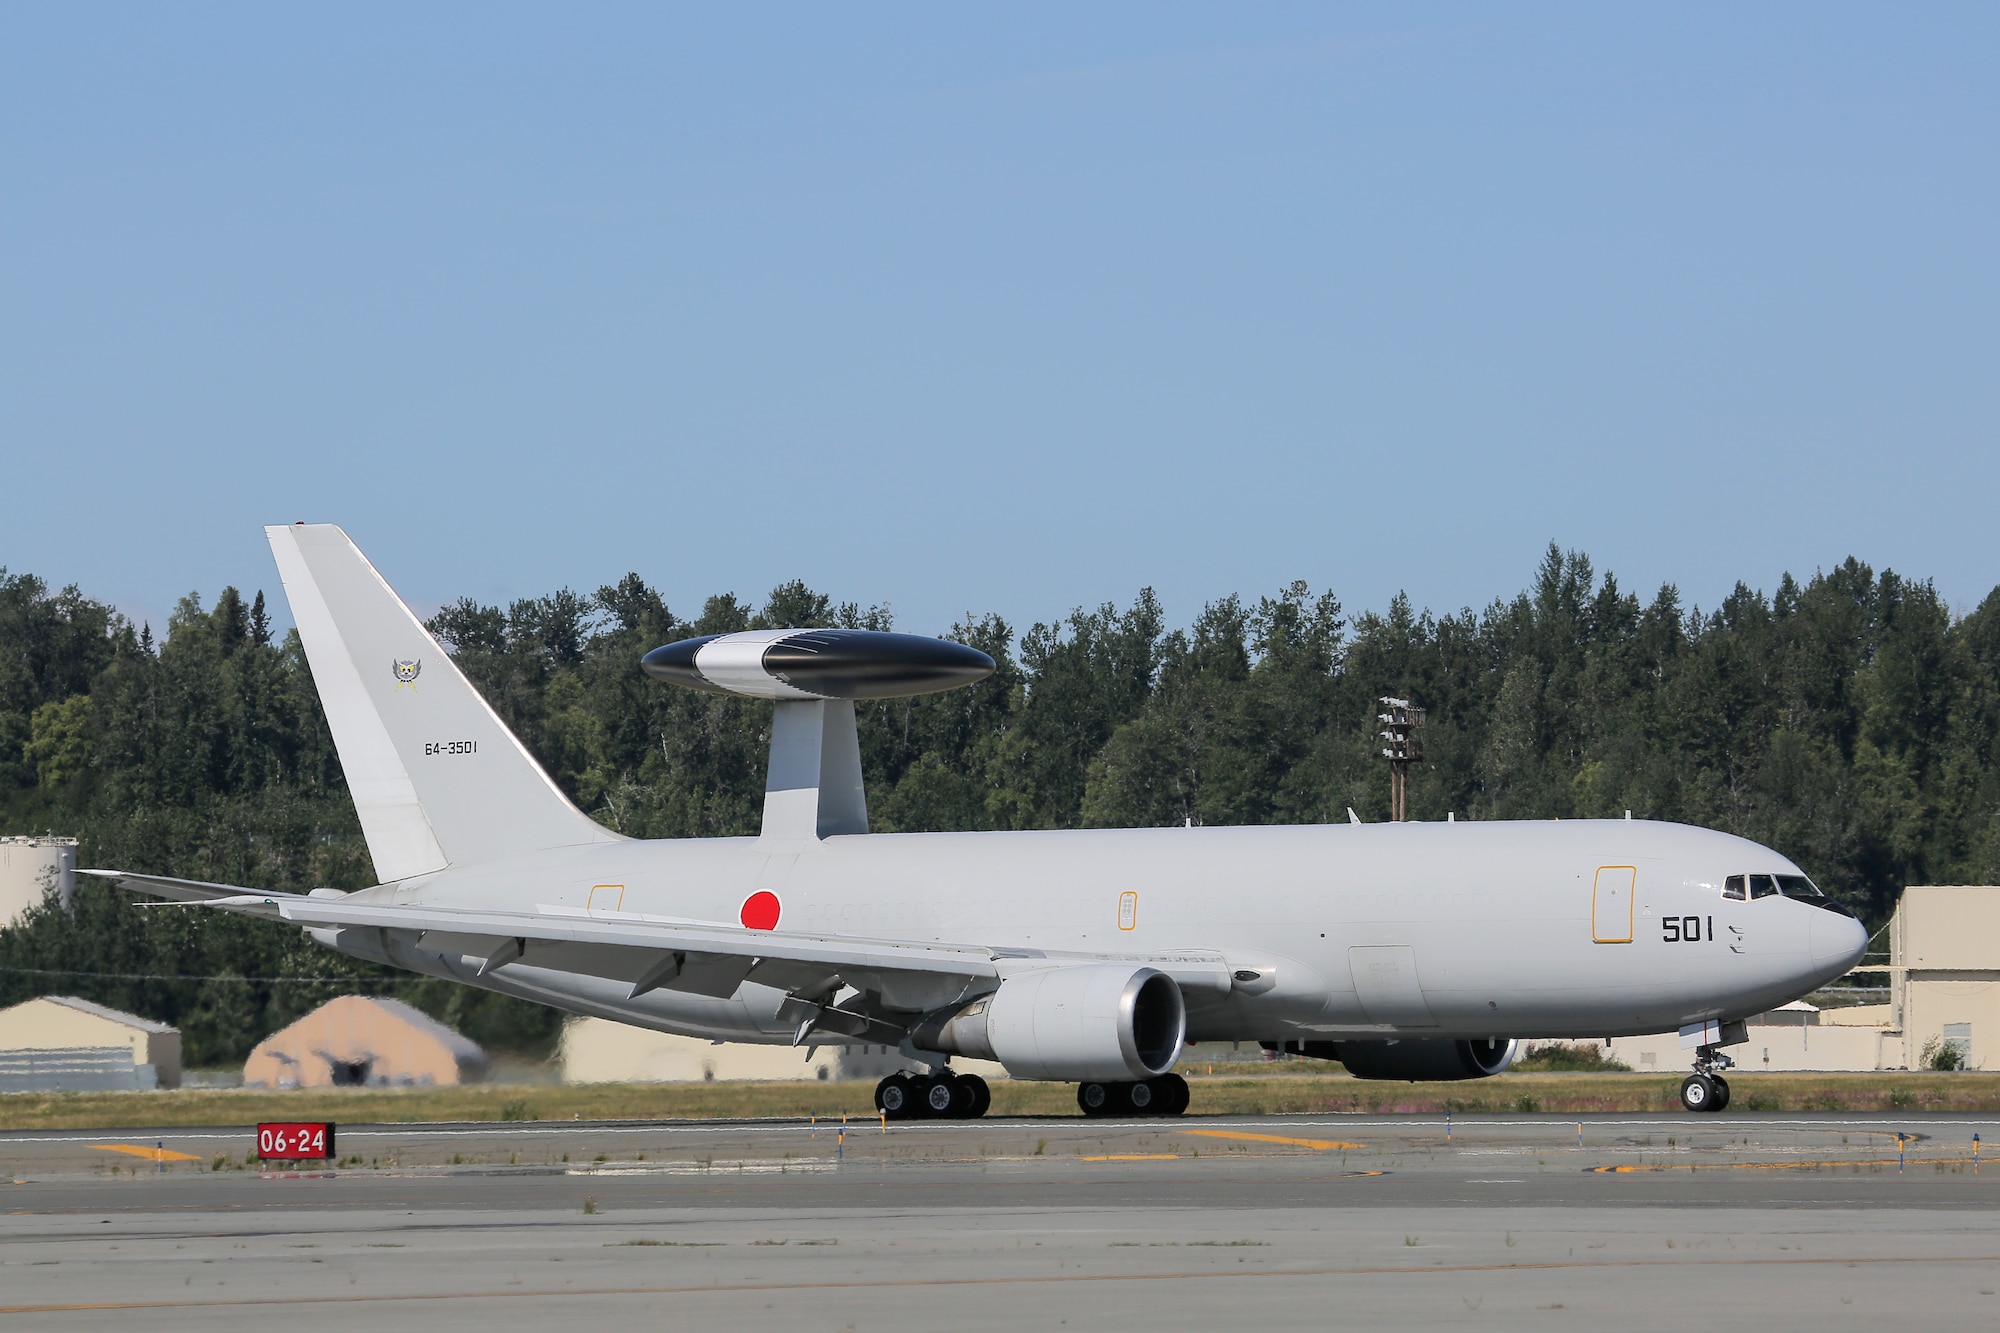 A Japan Air Self-Defense Force E-767 Airborne Warning and Control System aircraft taxis before takeoff on Joint Base Elmendorf-Richardson, Alaska, Aug. 14, 2015. The JASDF contingent is on JBER to participate in Red Flag-Alaska, a series of Pacific Air Forces commander-directed training exercises for U.S. and international forces to provide joint offensive, counter-air, interdiction, close air support, and large force employment in a simulated combat environment. (U.S. Air Force photo/Alejandro Pena)